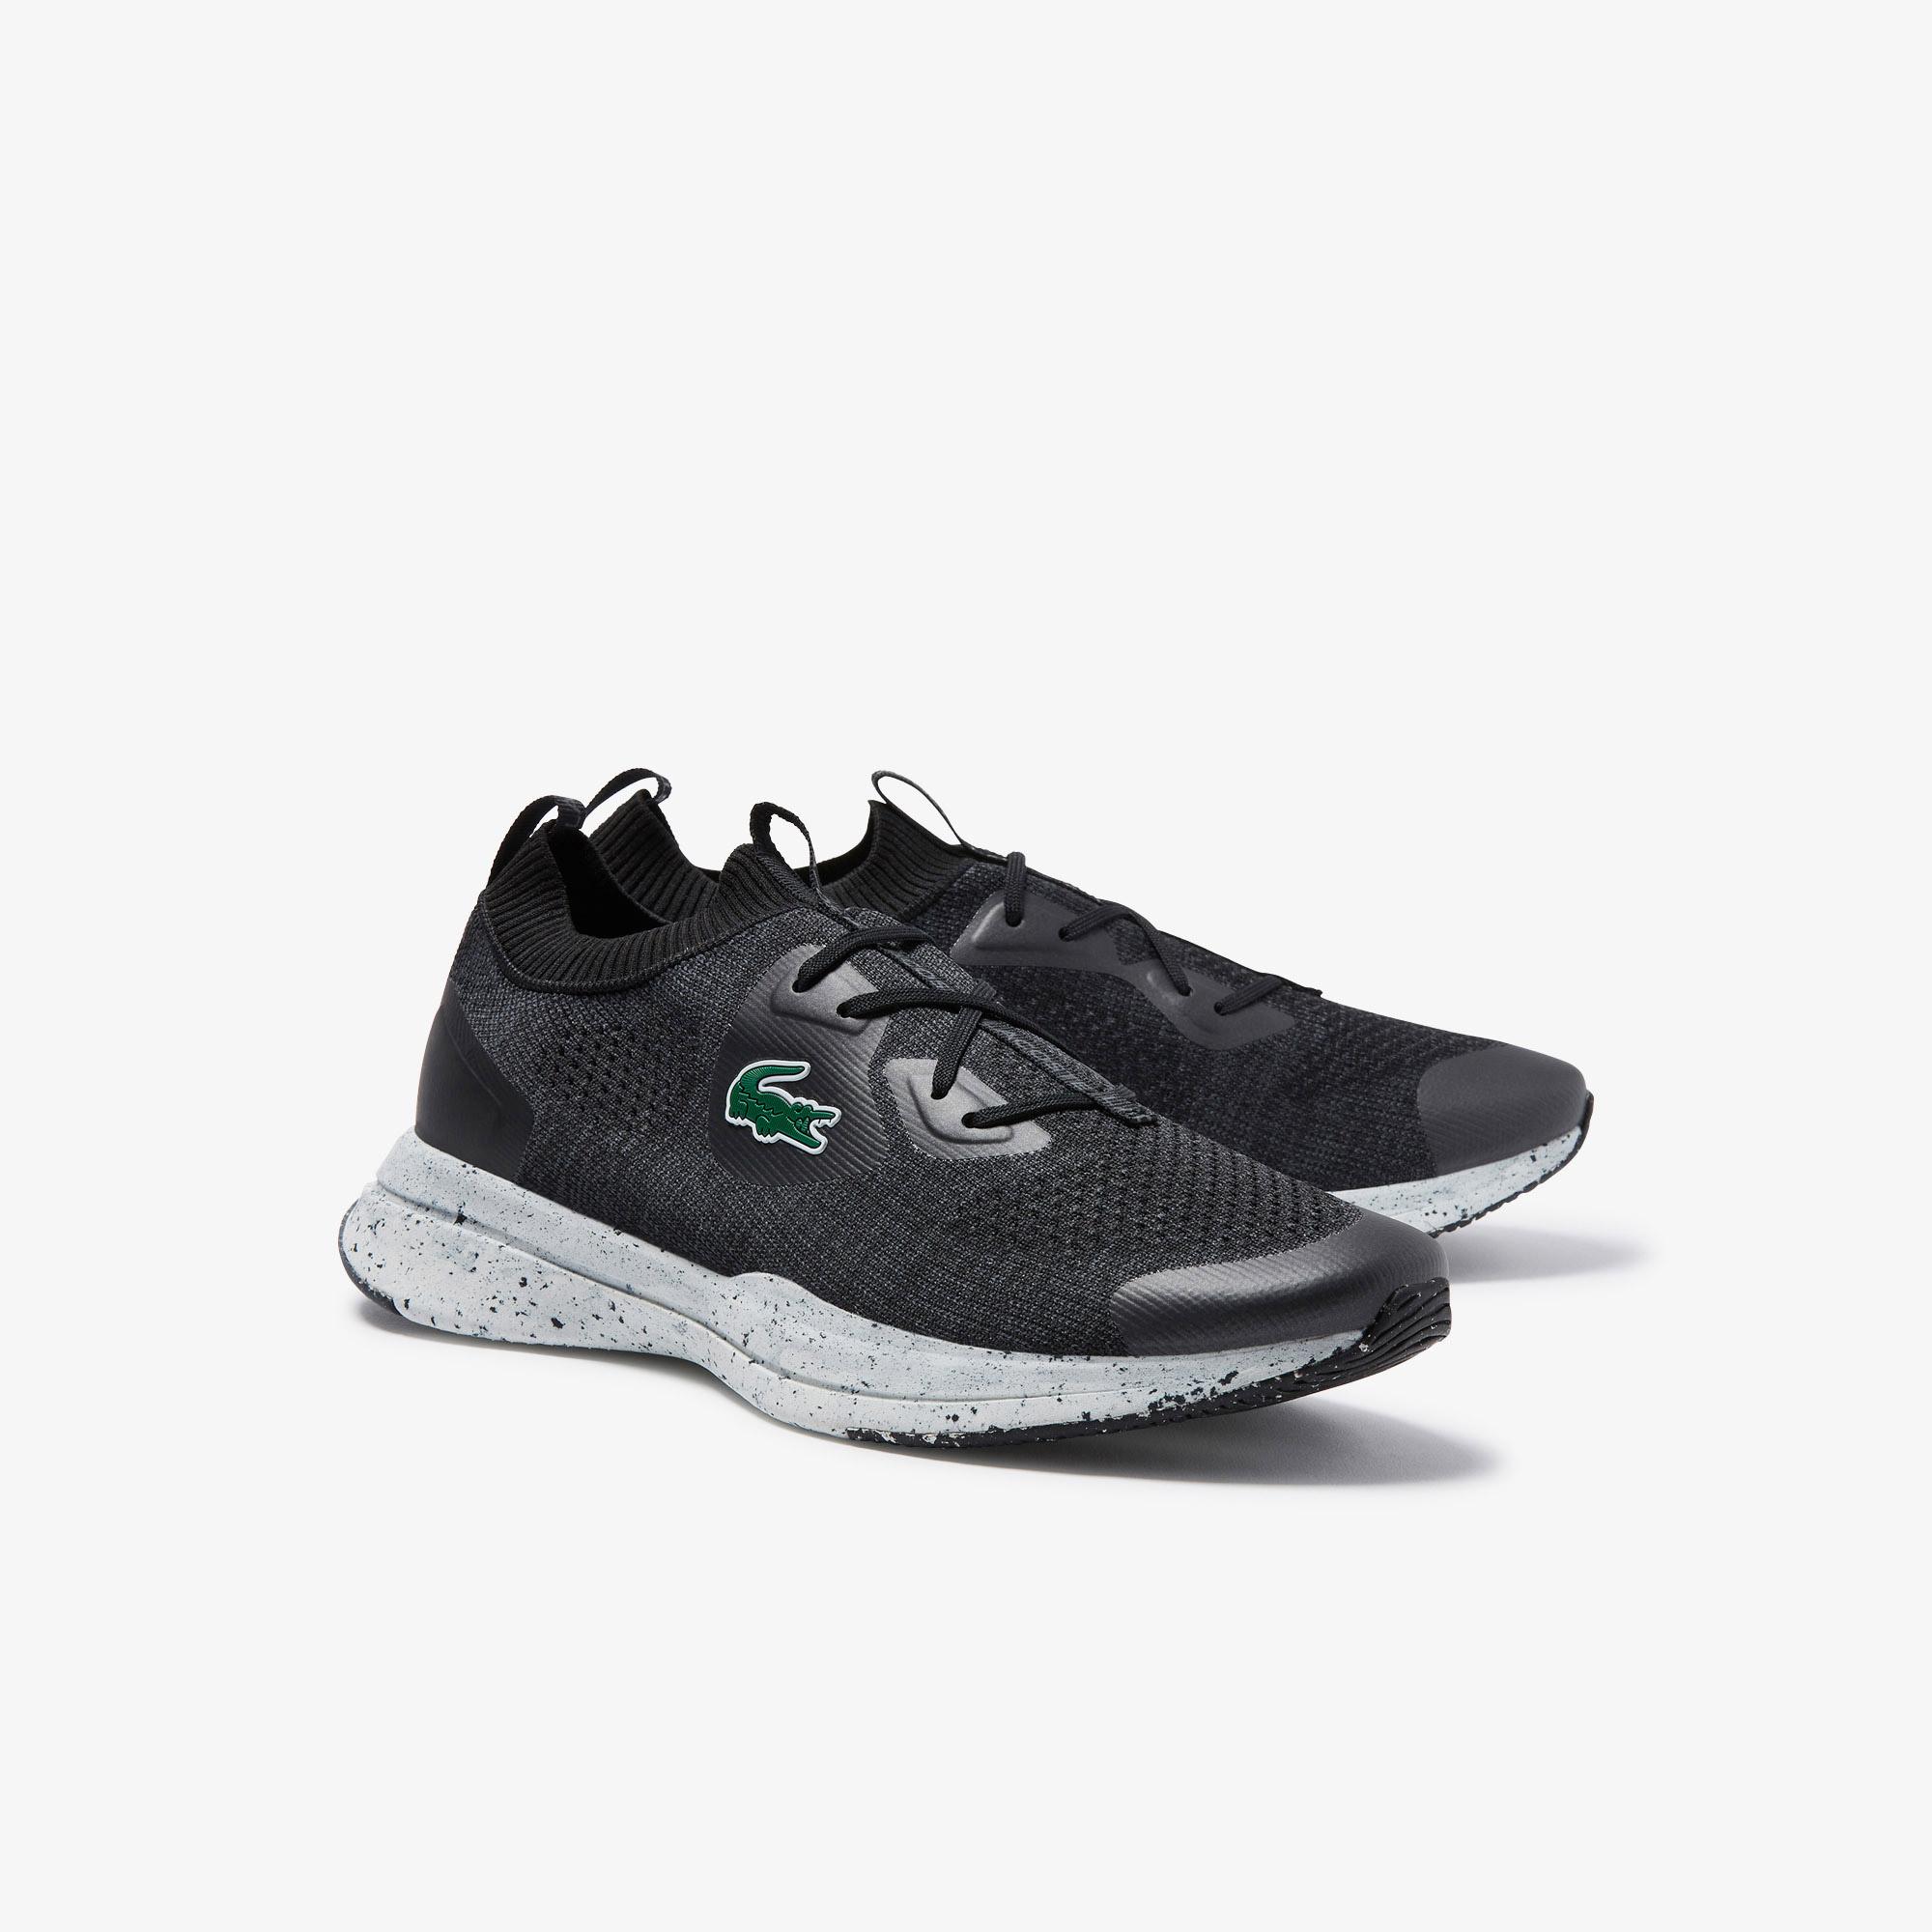 Lacoste active кроссовки. Кроссовки лакост Run Spin. Lacoste Run Spin EVO 123 1. 743sma0016 454 Lacoste. Мужские кроссовки Run Spin Eco 0722 1.